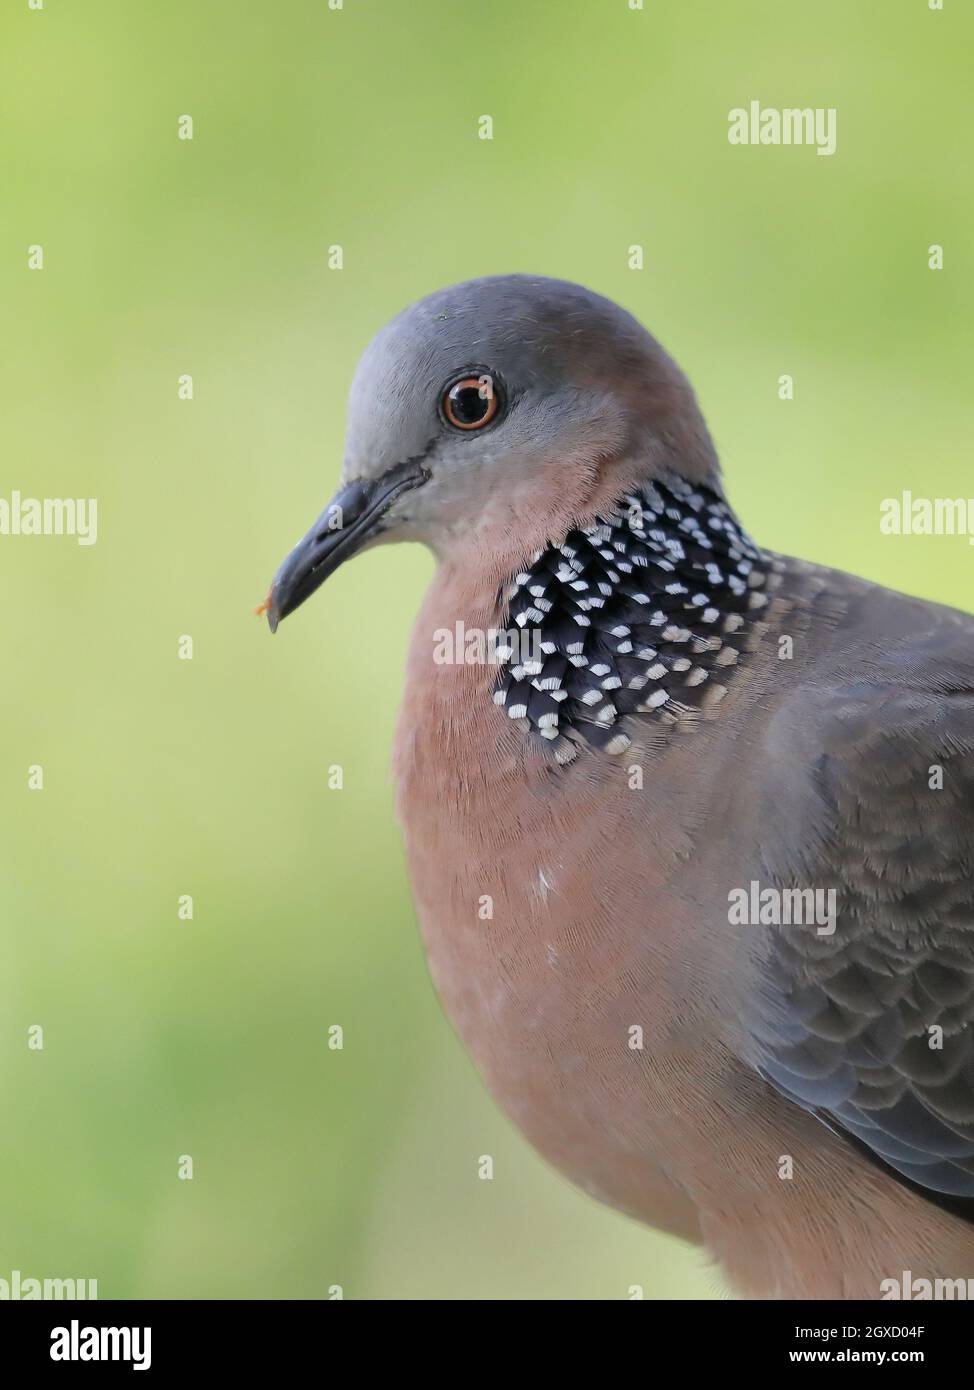 Spotted dove (Spilopelia chinensis) in Hawaii, United States Stock Photo